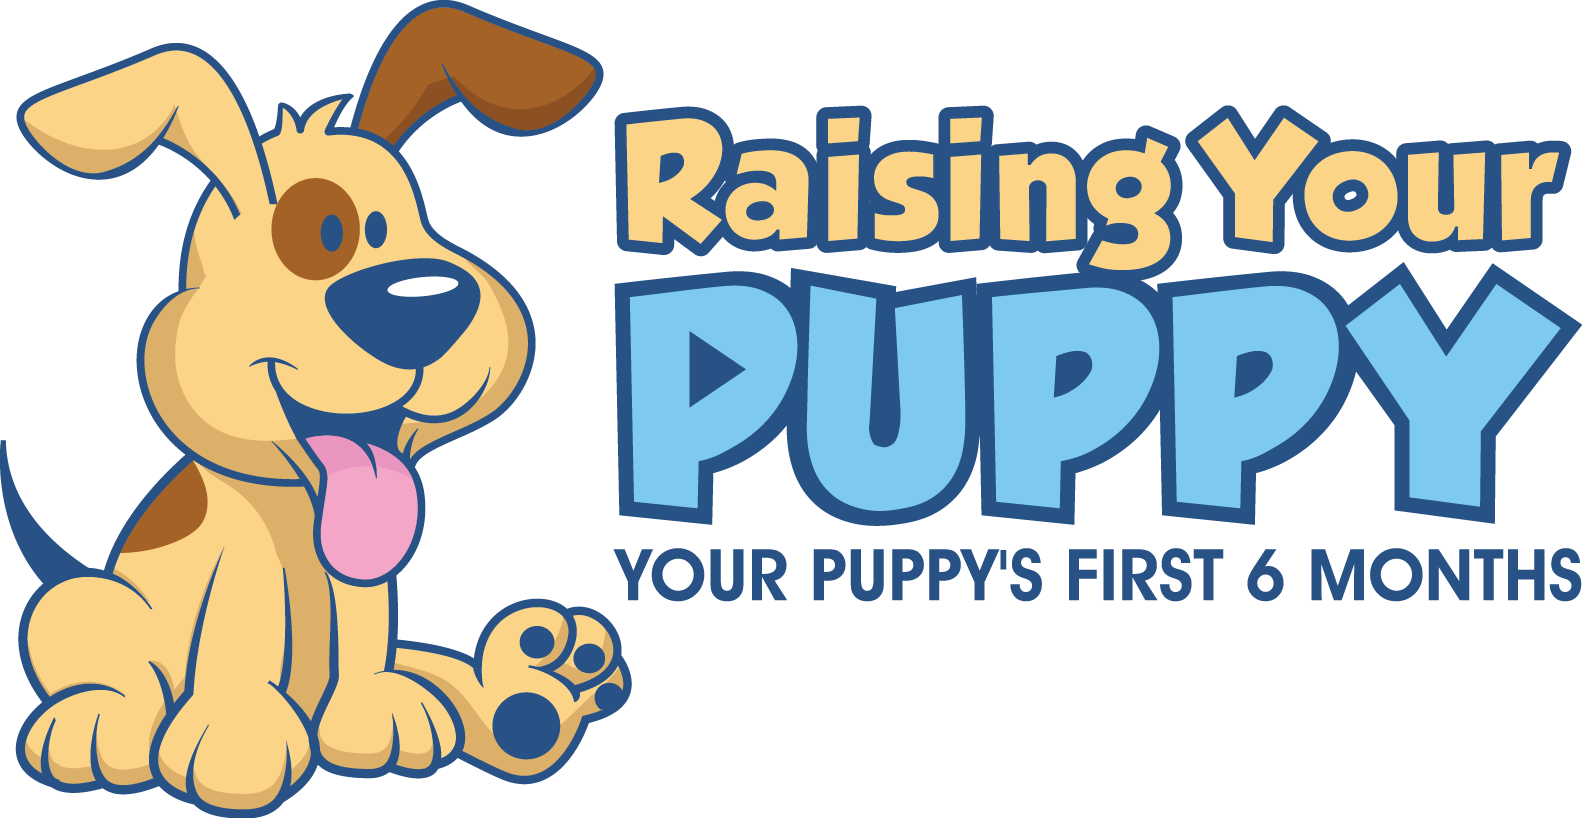 Robin K Bennett's Raising Your Puppy™ online dog training course is excellent for families with a new puppy or working on teaching an old dog new tricks.